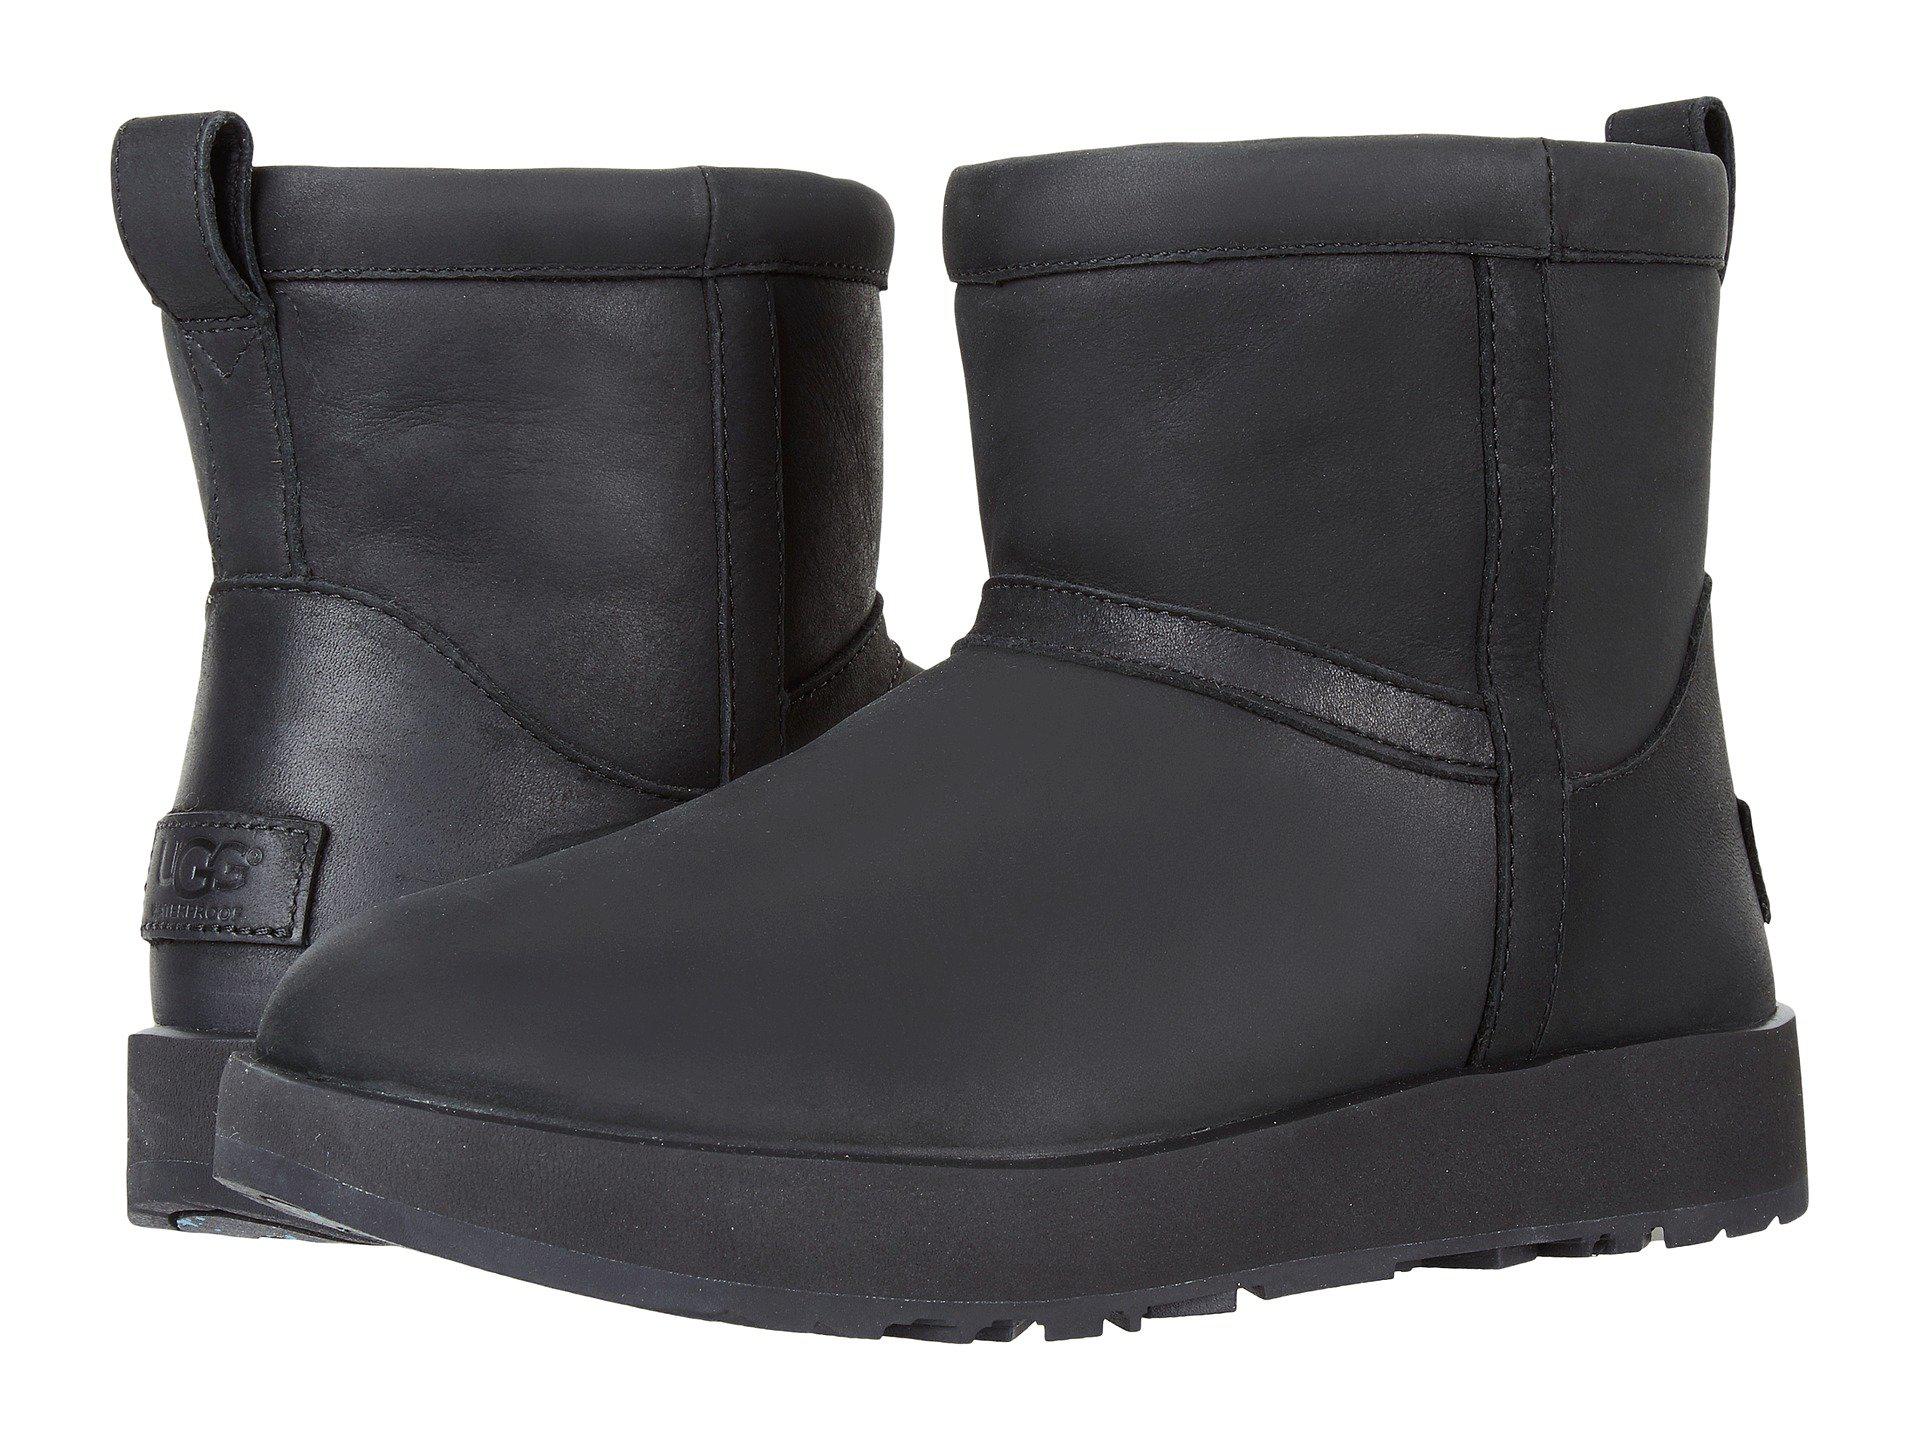 Ugg Mini Leather Waterproof Boots Shop, SAVE 40% - aveclumiere.com